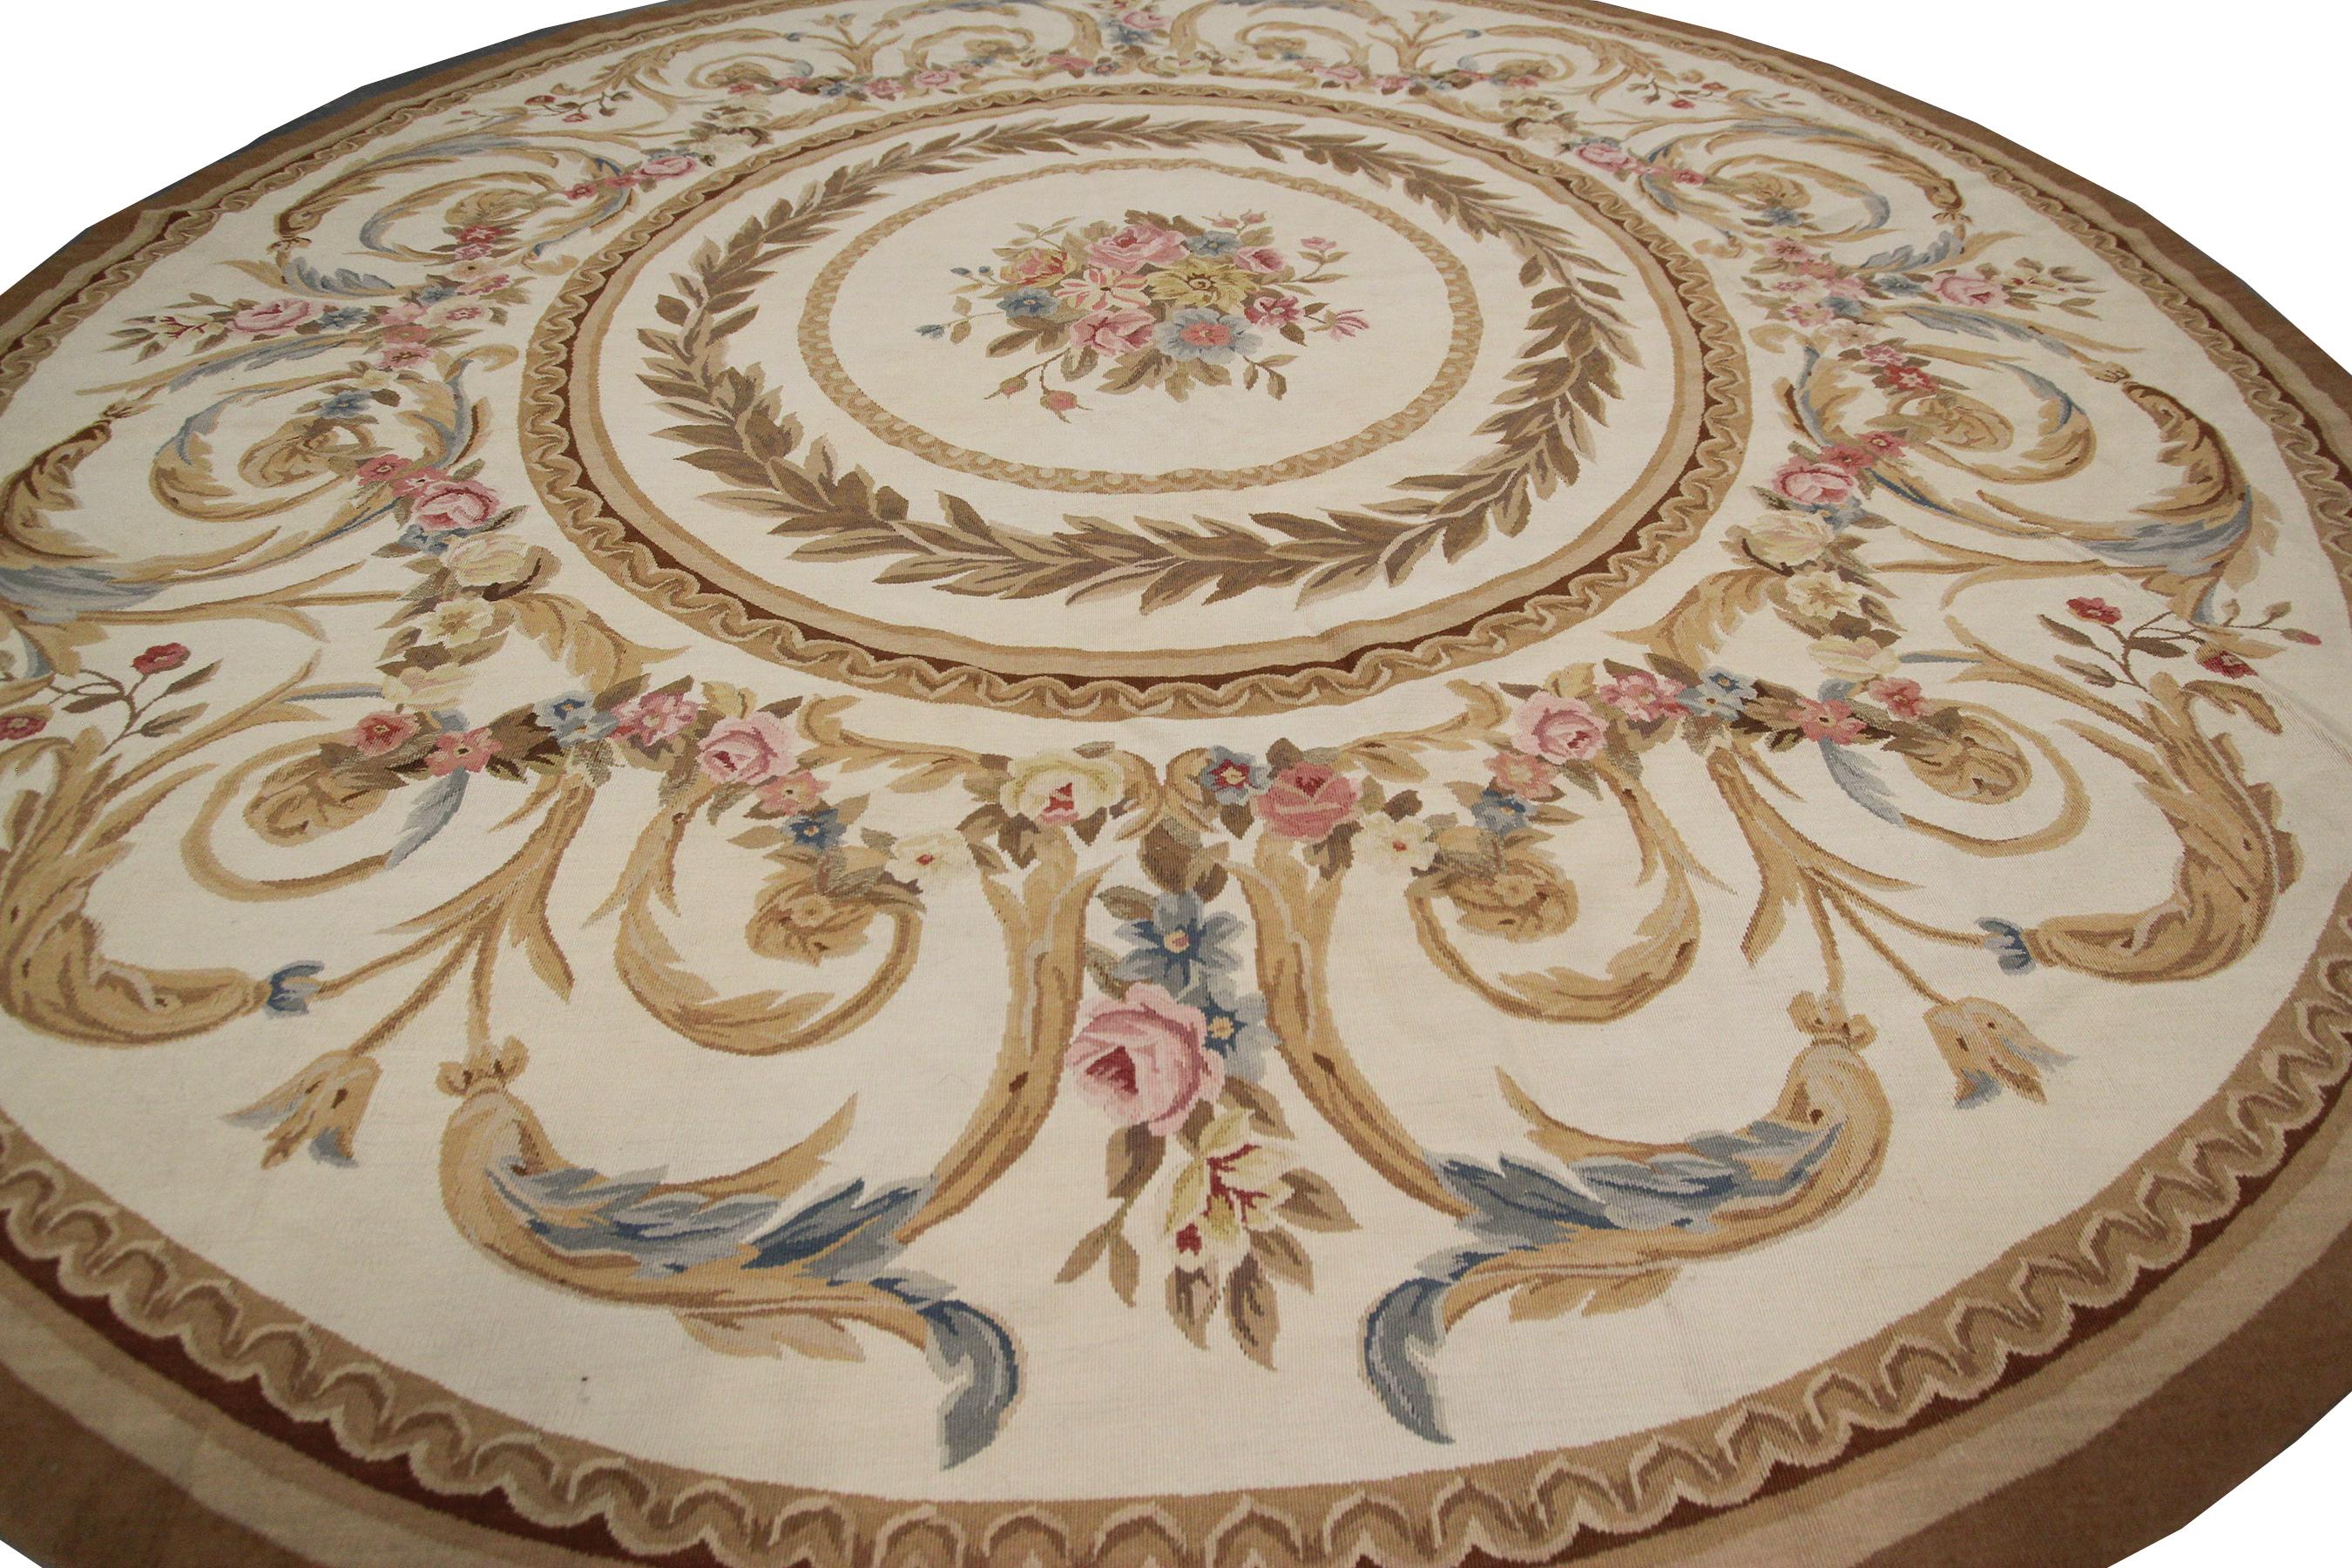 Antique French Aubusson Rug Hand Woven Aubusson Rug 8x8 Round Rug 244cm x 244cm In Good Condition For Sale In New York, NY